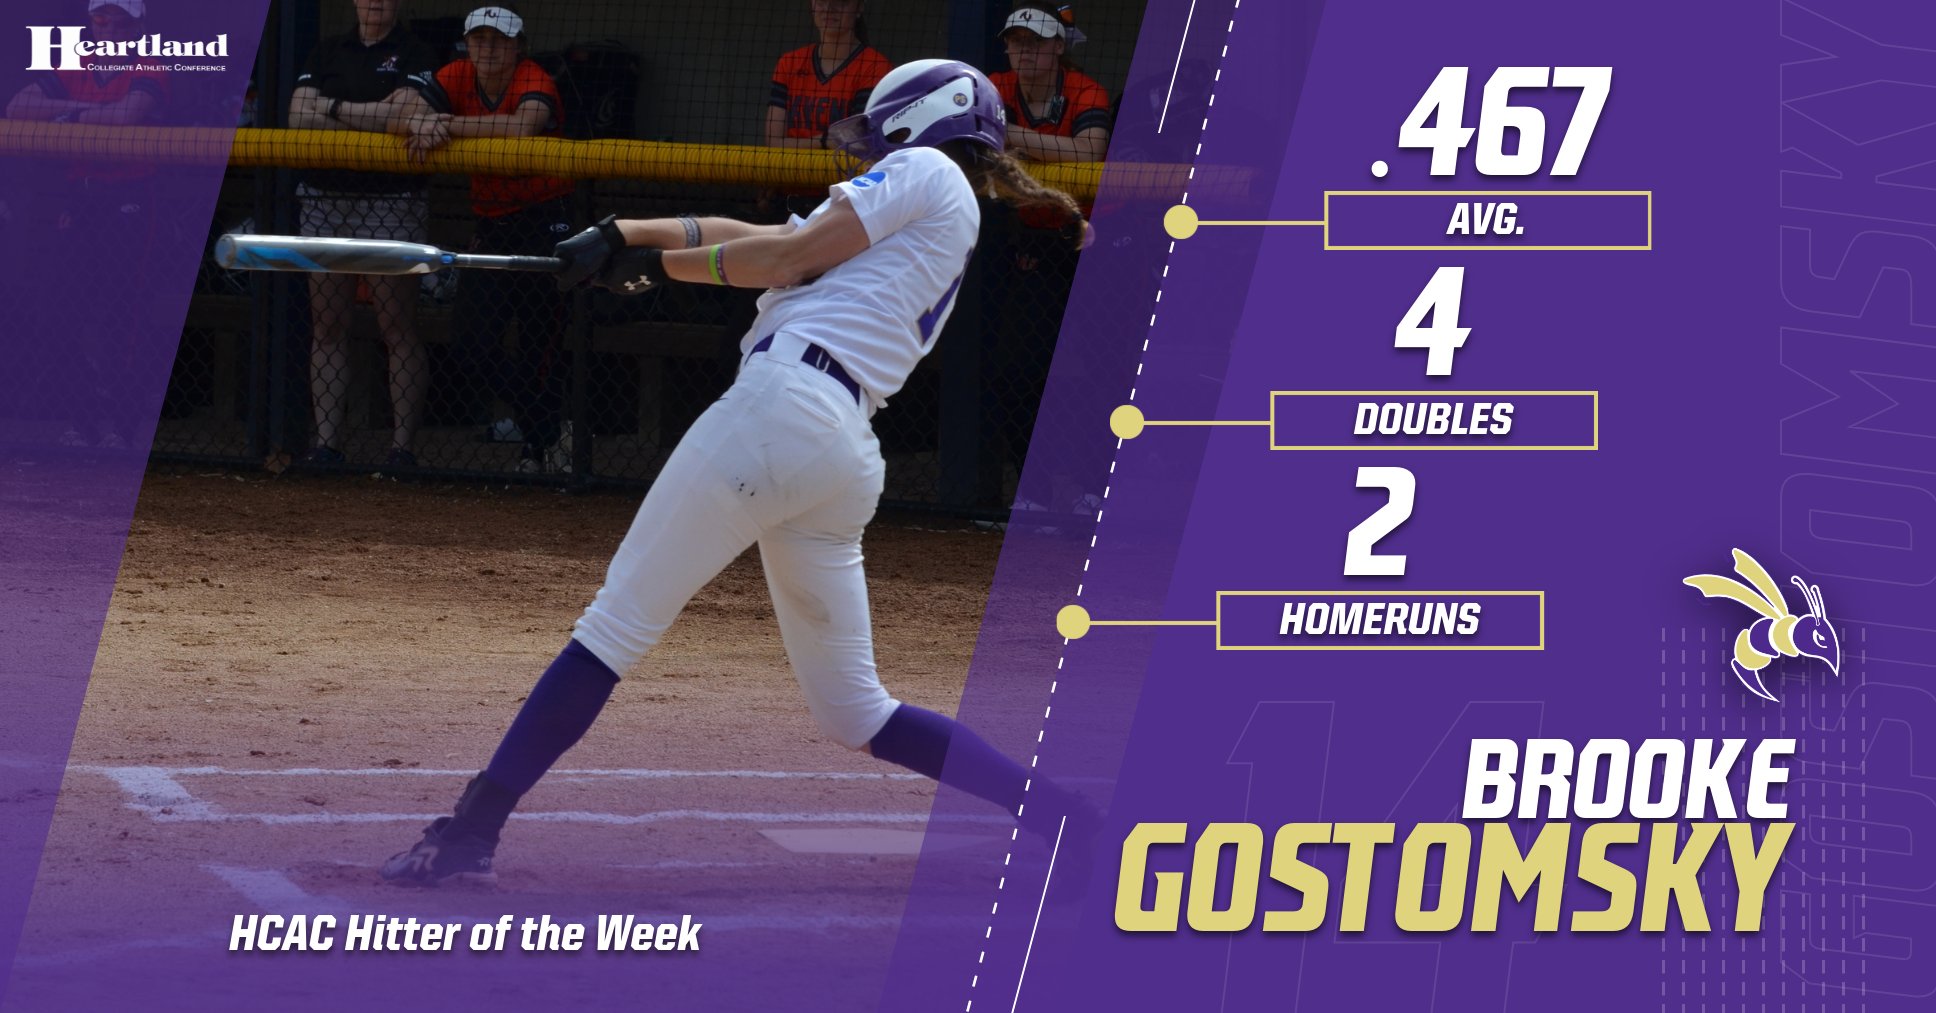 Gostomsky named HCAC Hitter of the Week